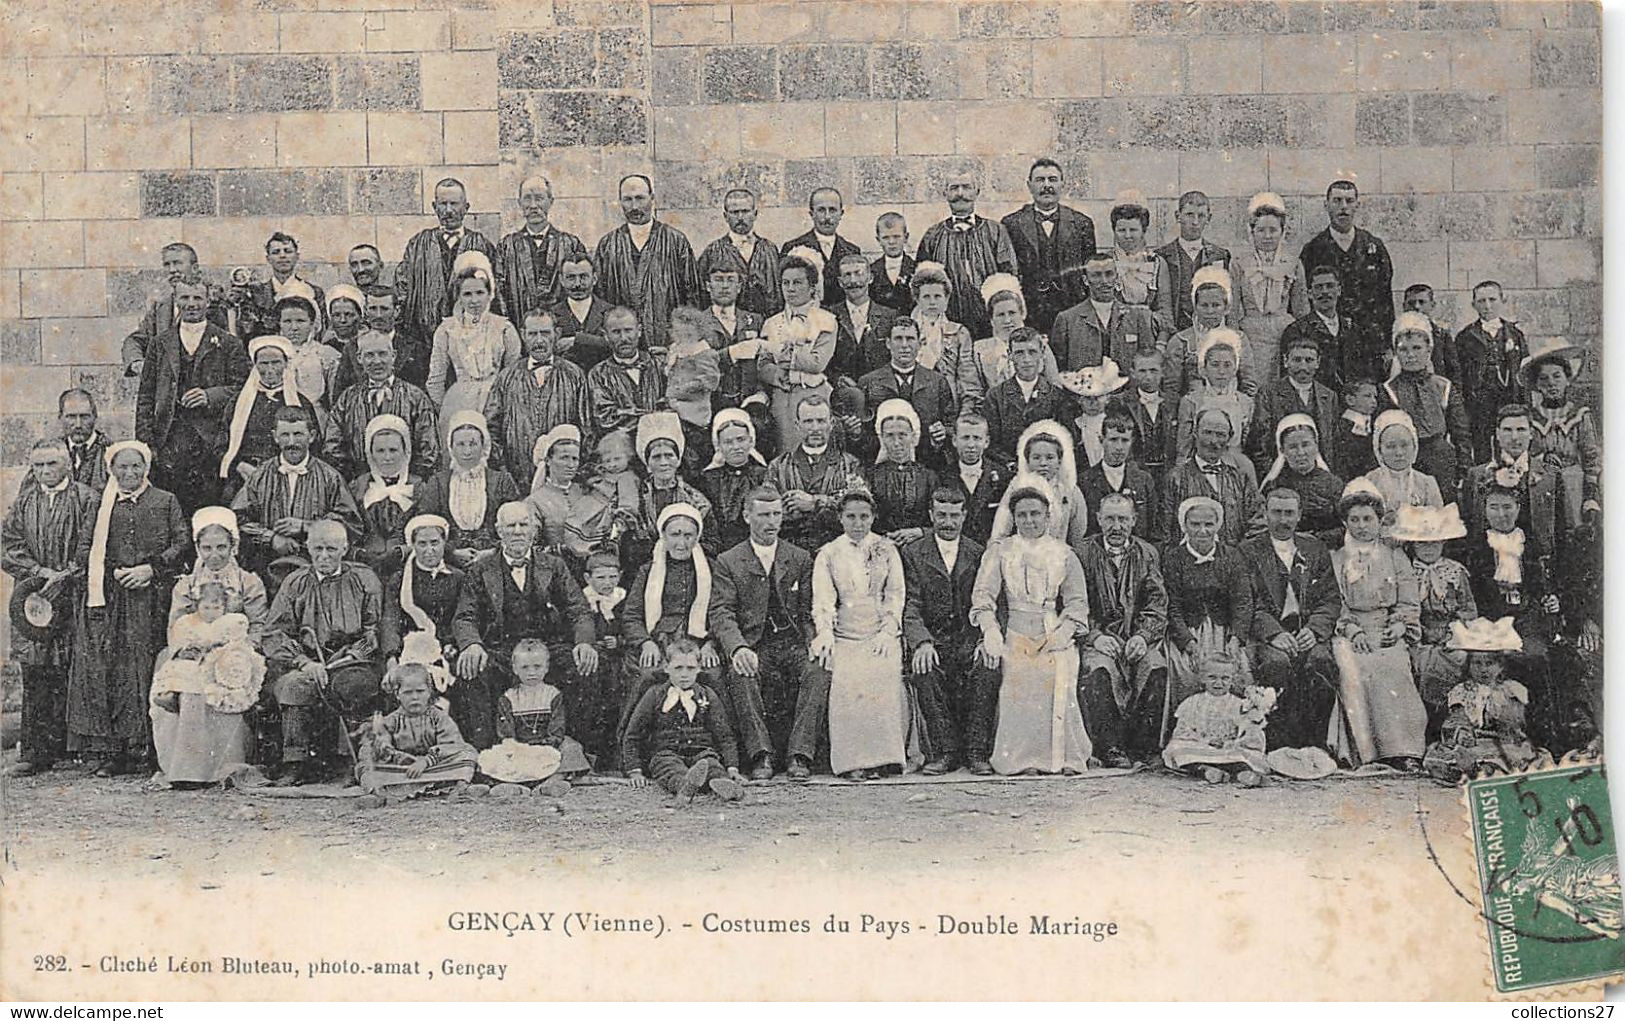 86-GENCAY- COSTUMES DU PAYS, DOUBLE MARIAGE - Gencay